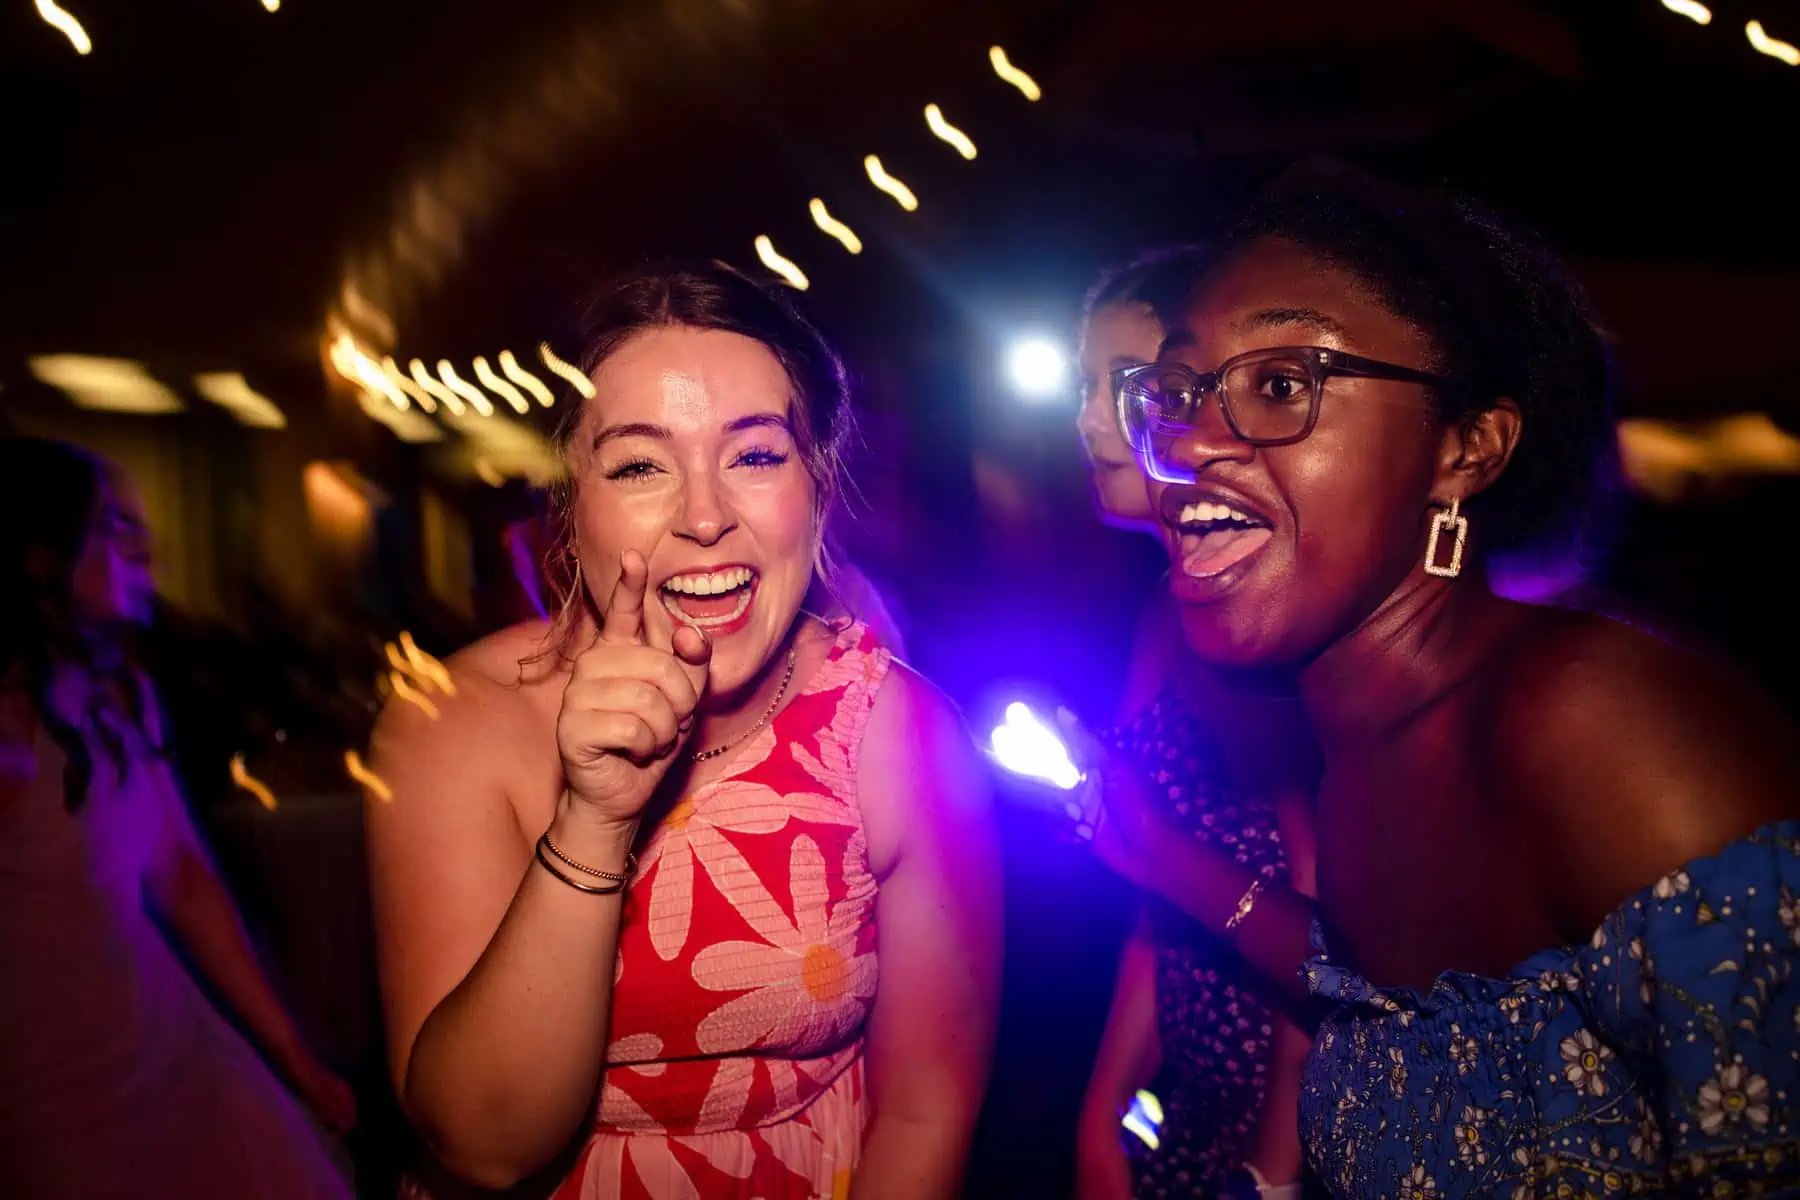 Two women dancing on the dance floor at a party.